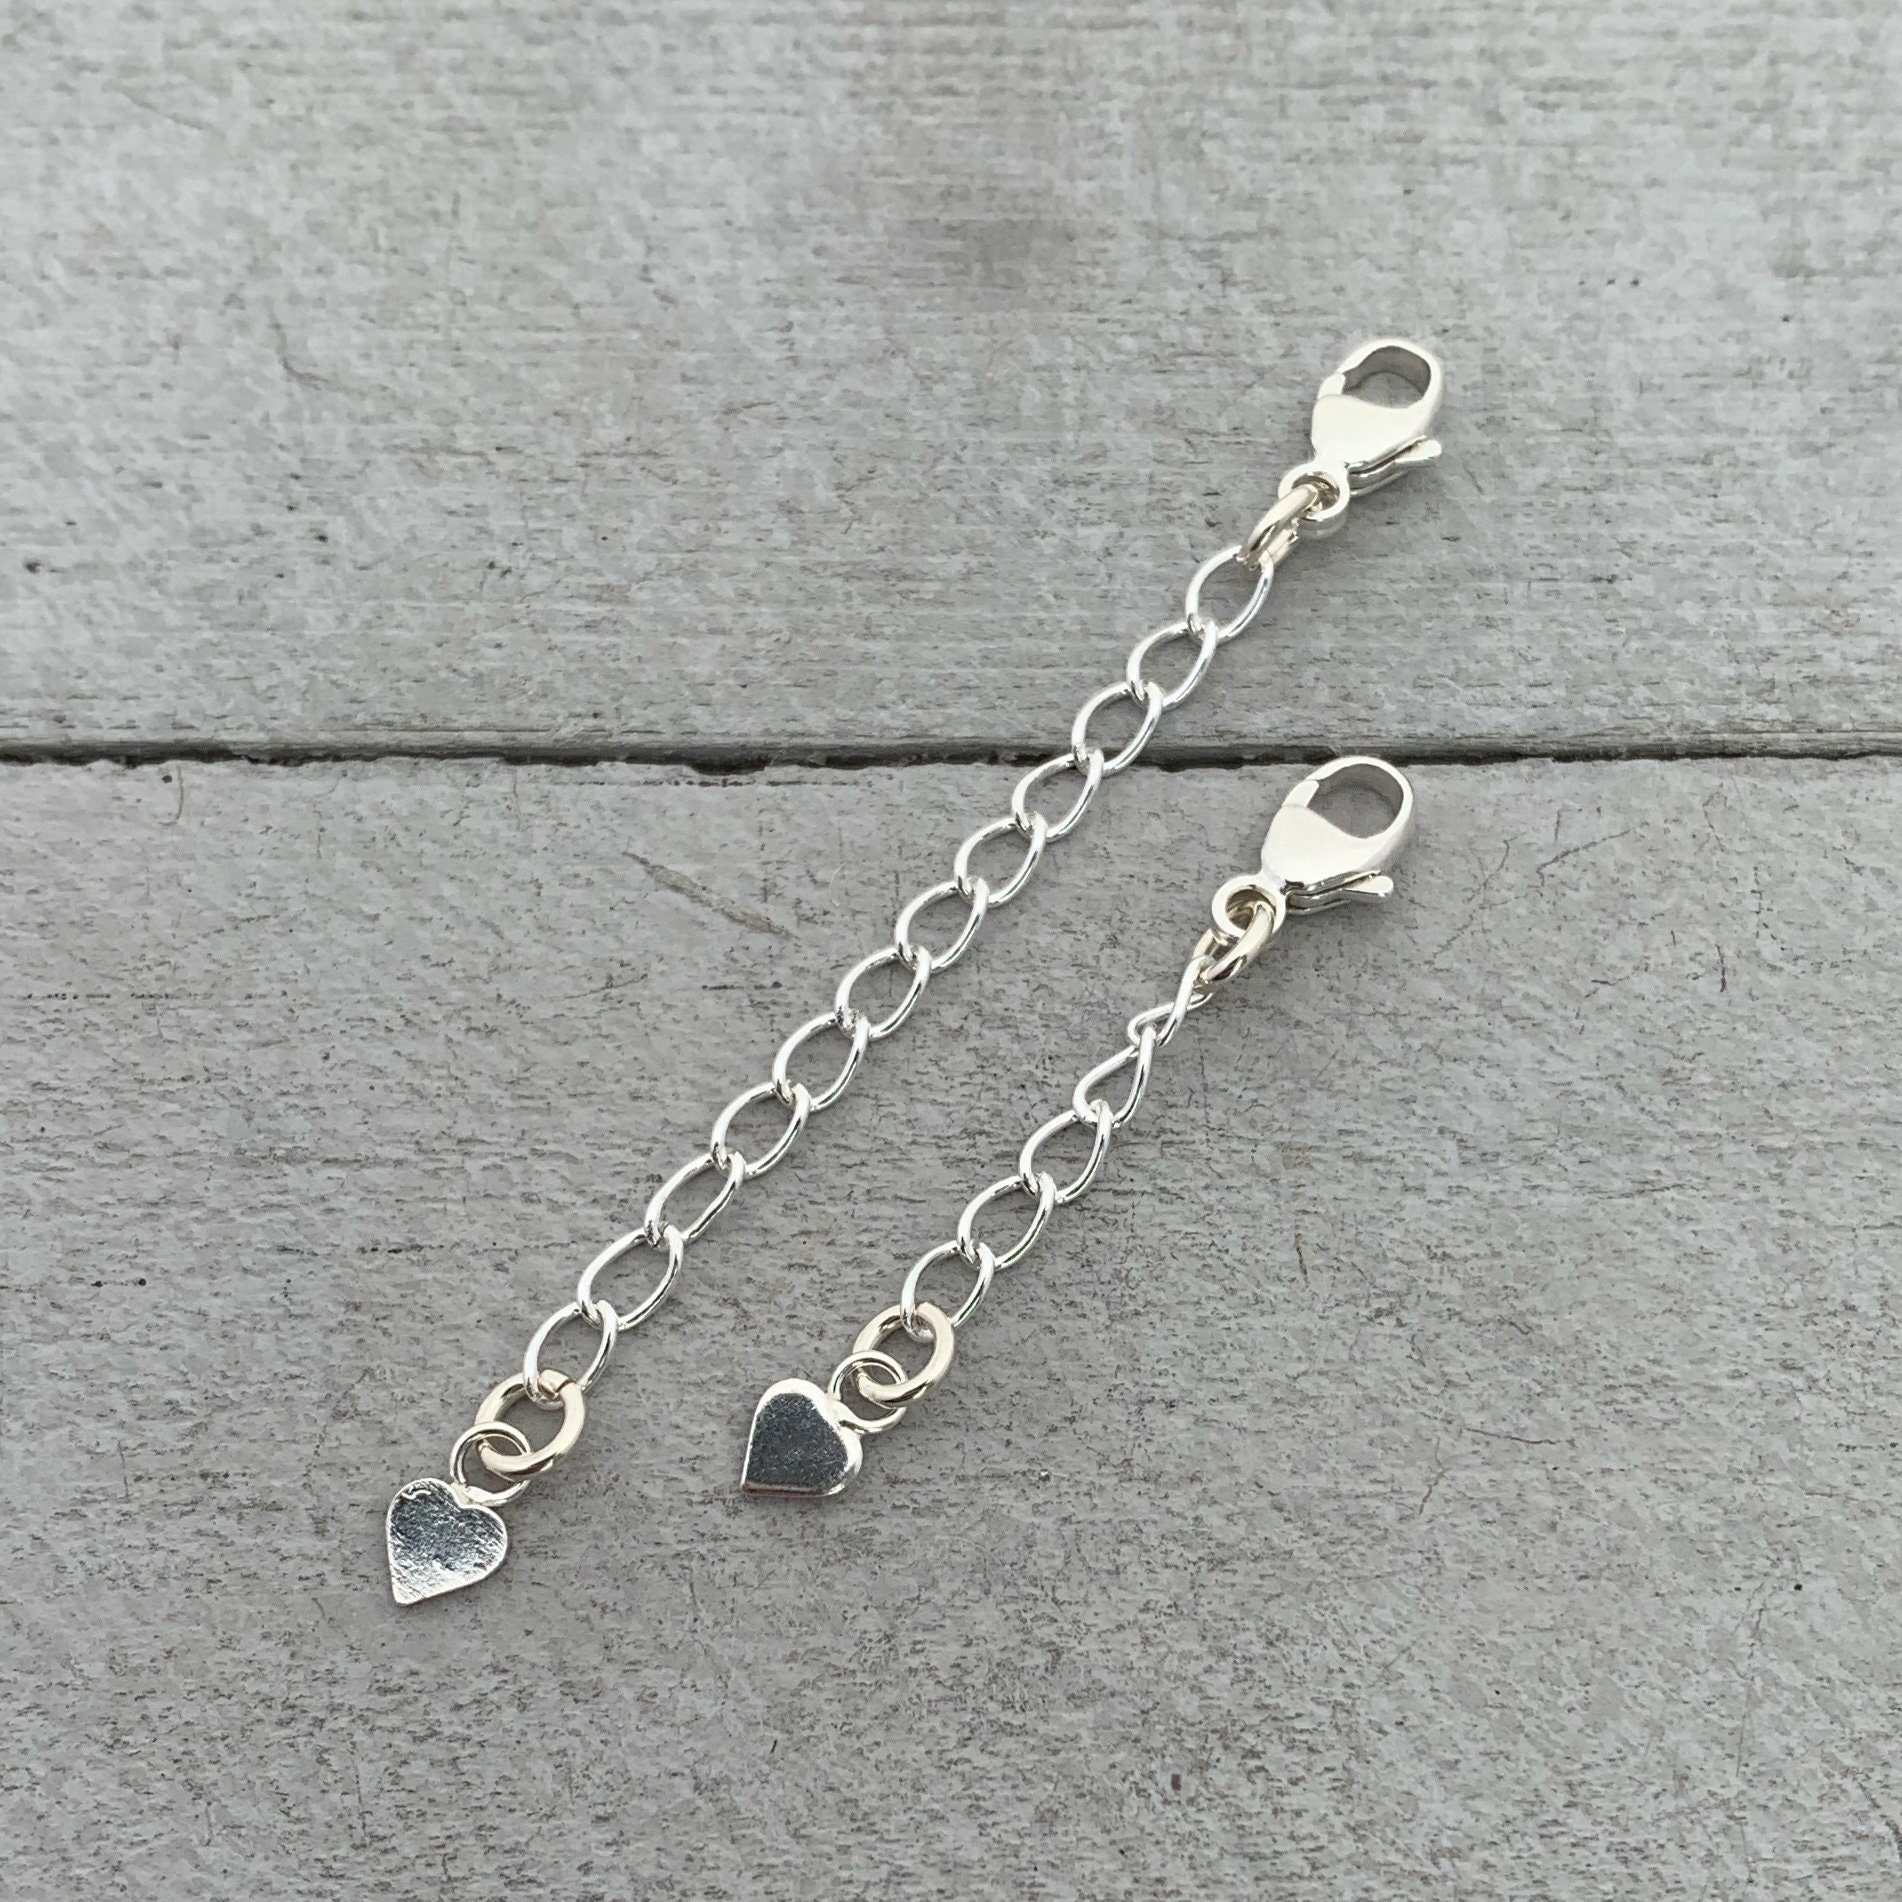 2 Necklace Chain Extender - 925 Sterling Silver - Split Ring and Puff  Heart, 2 Inch Extension